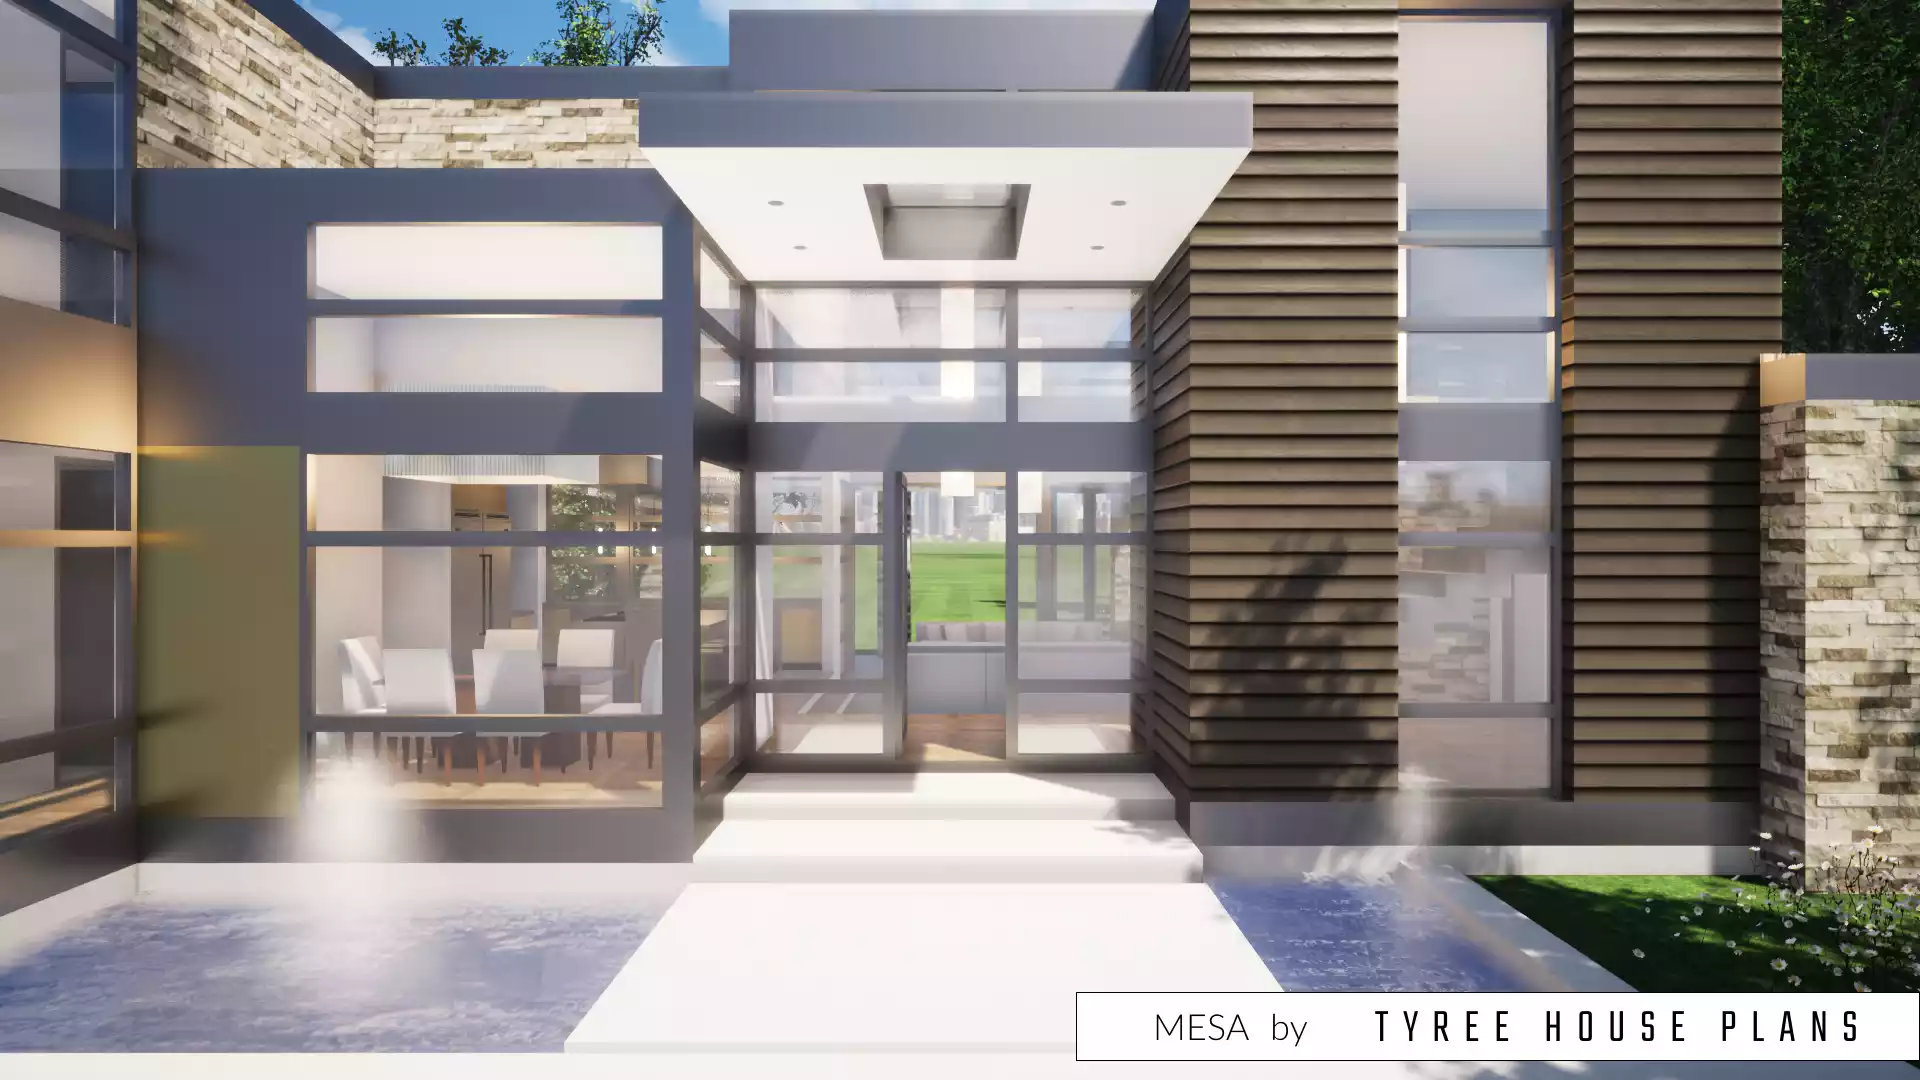 Entry doors. Mesa by Tyree House Plans.